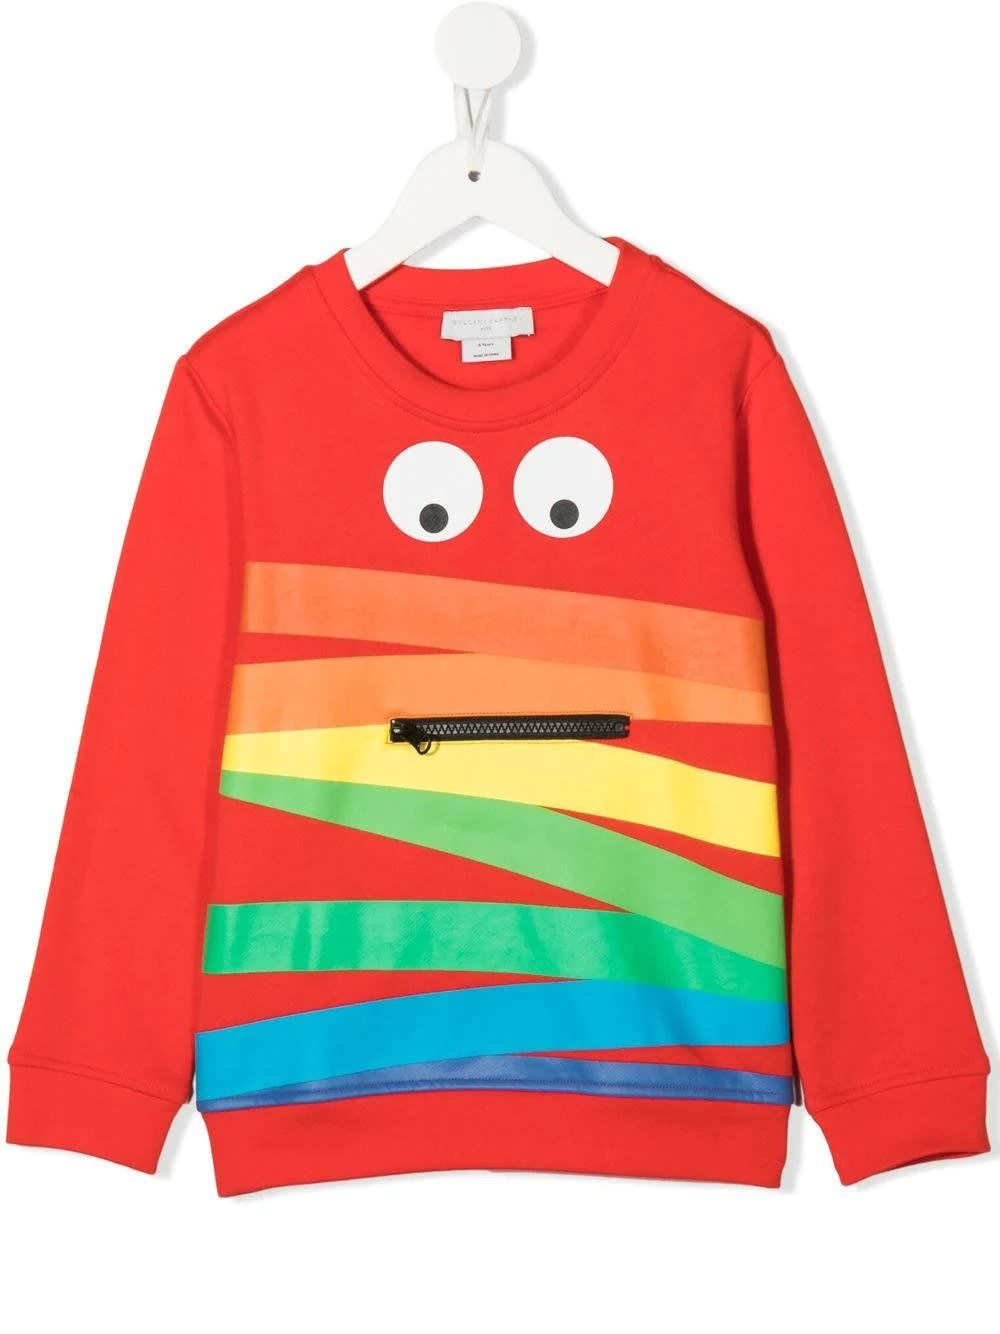 Stella McCartney Kids Red Sweatshirt With Zip And Multicolored Graphic Print